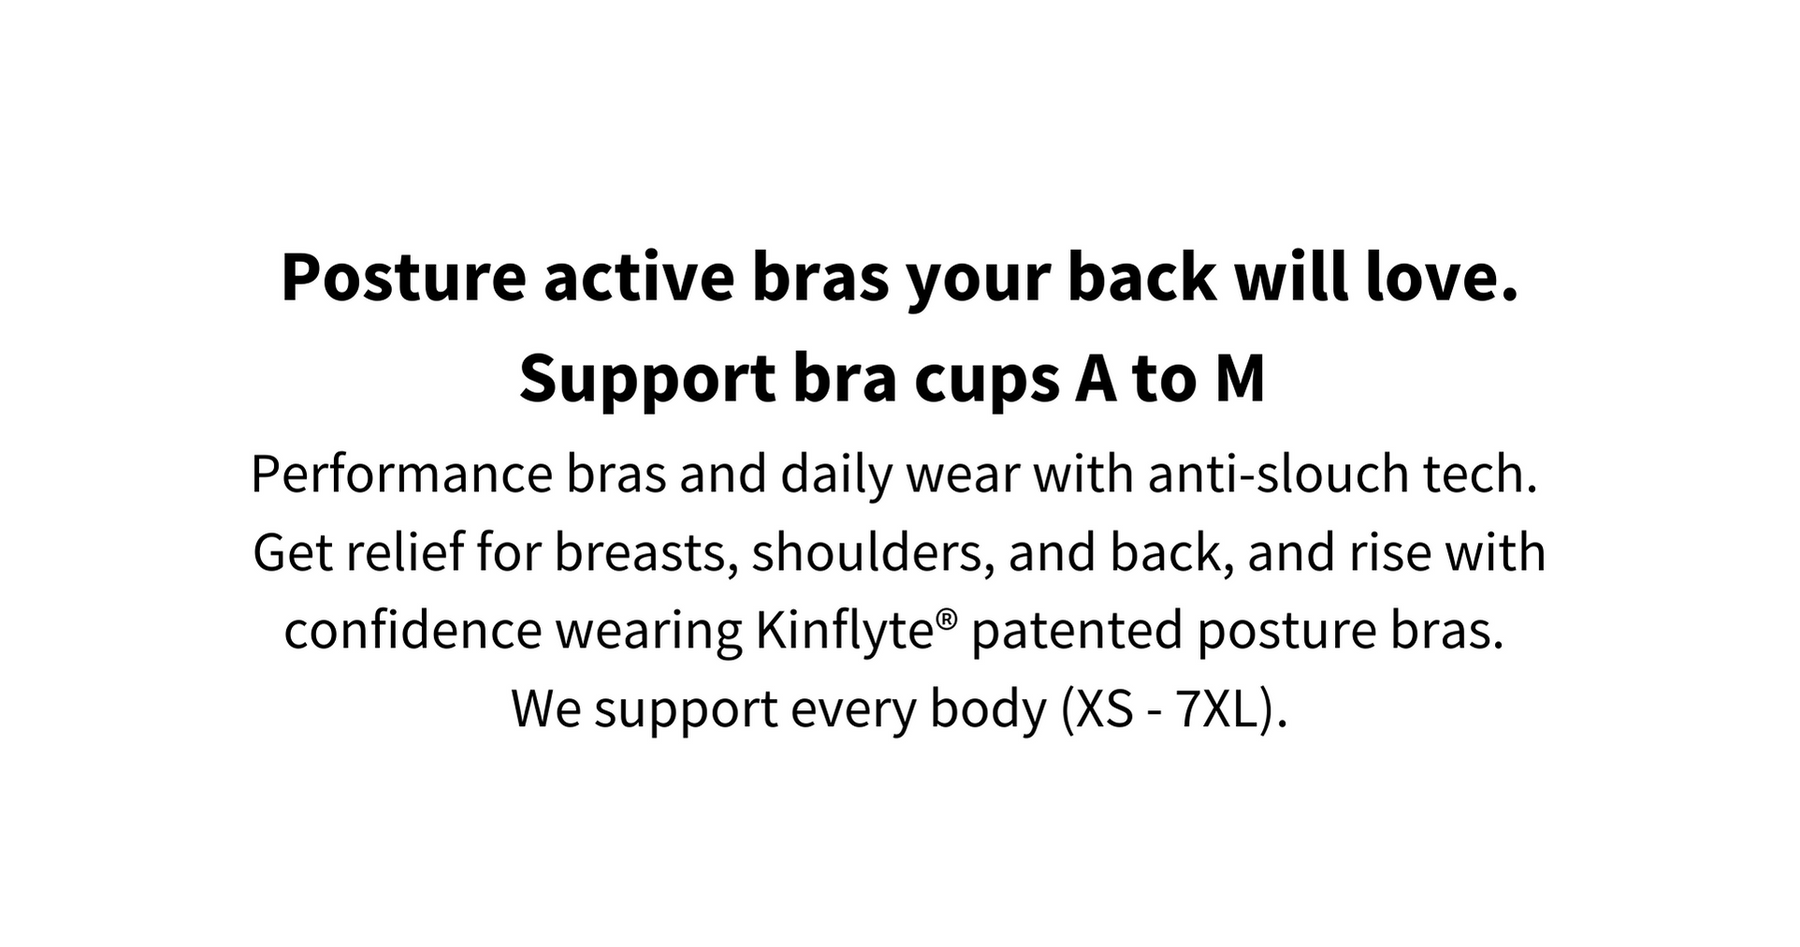 Posture correcting sports bras your back will love. These posture bras support bra cups A to M. Performance bras and daily wear with anti-slouch tech.  Get relief for breasts, shoulders, and back, and rise with confidence wearing Kinflyte® patented posture bras.  We support every body (XS - 7XL).